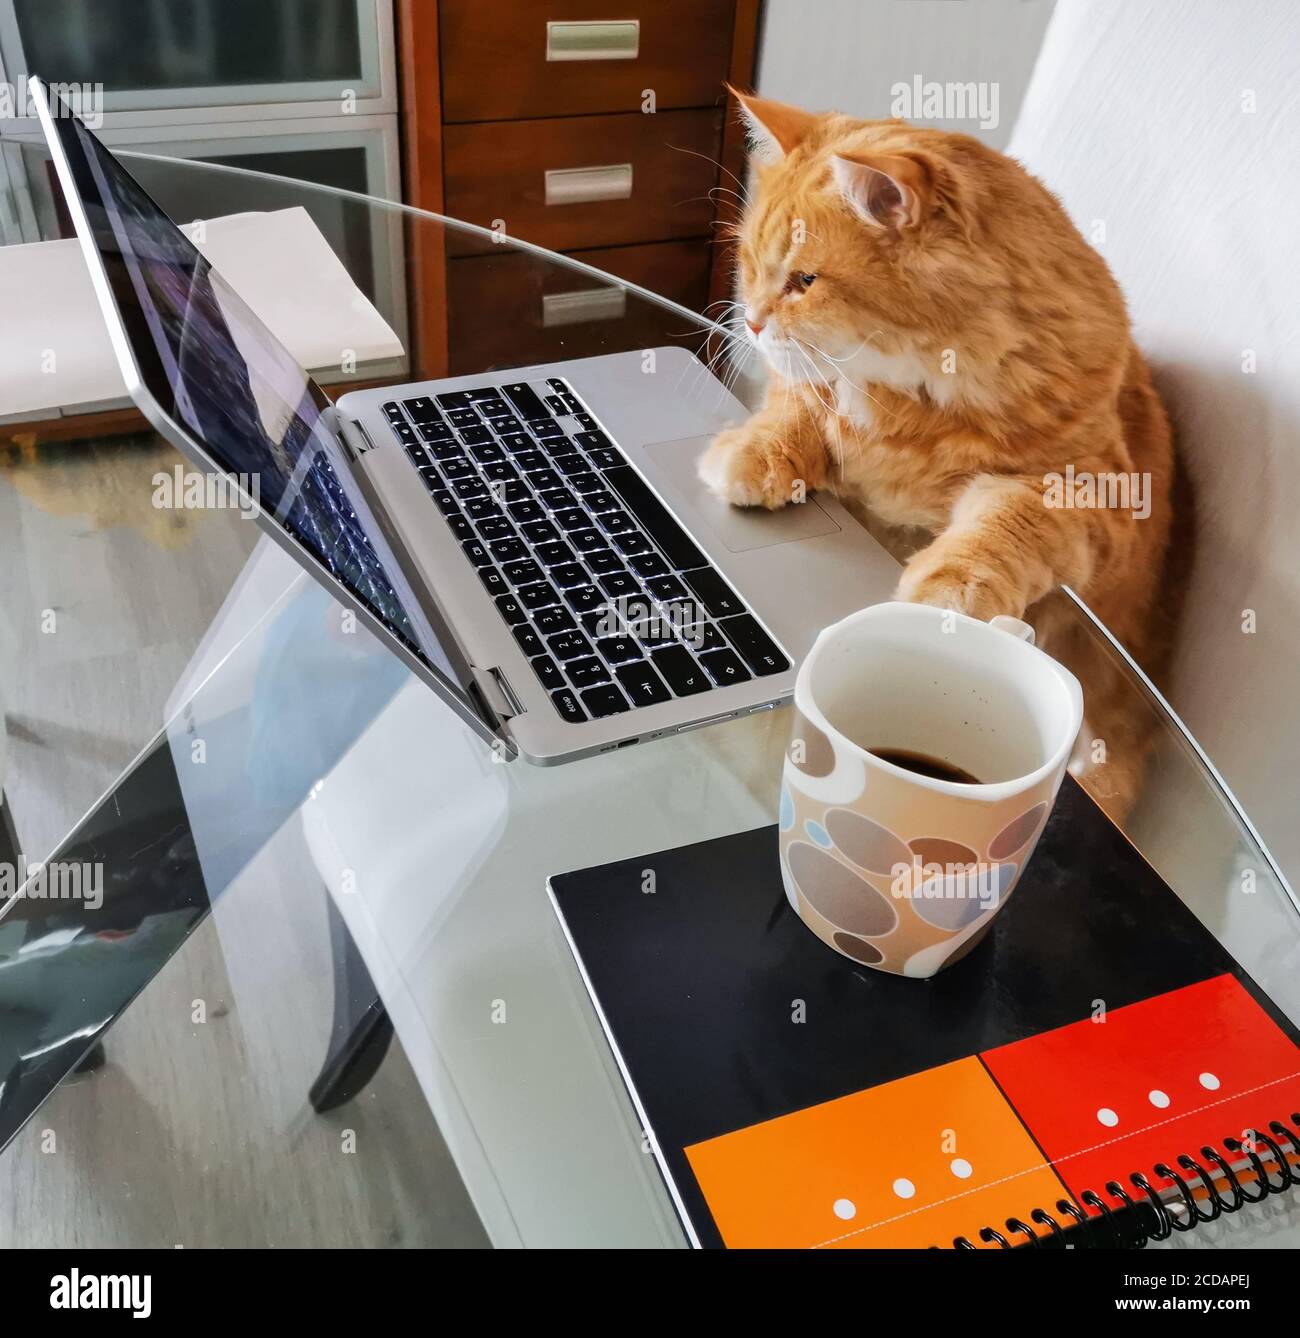 cat surfing on internet in its comfortable chair Stock Photo